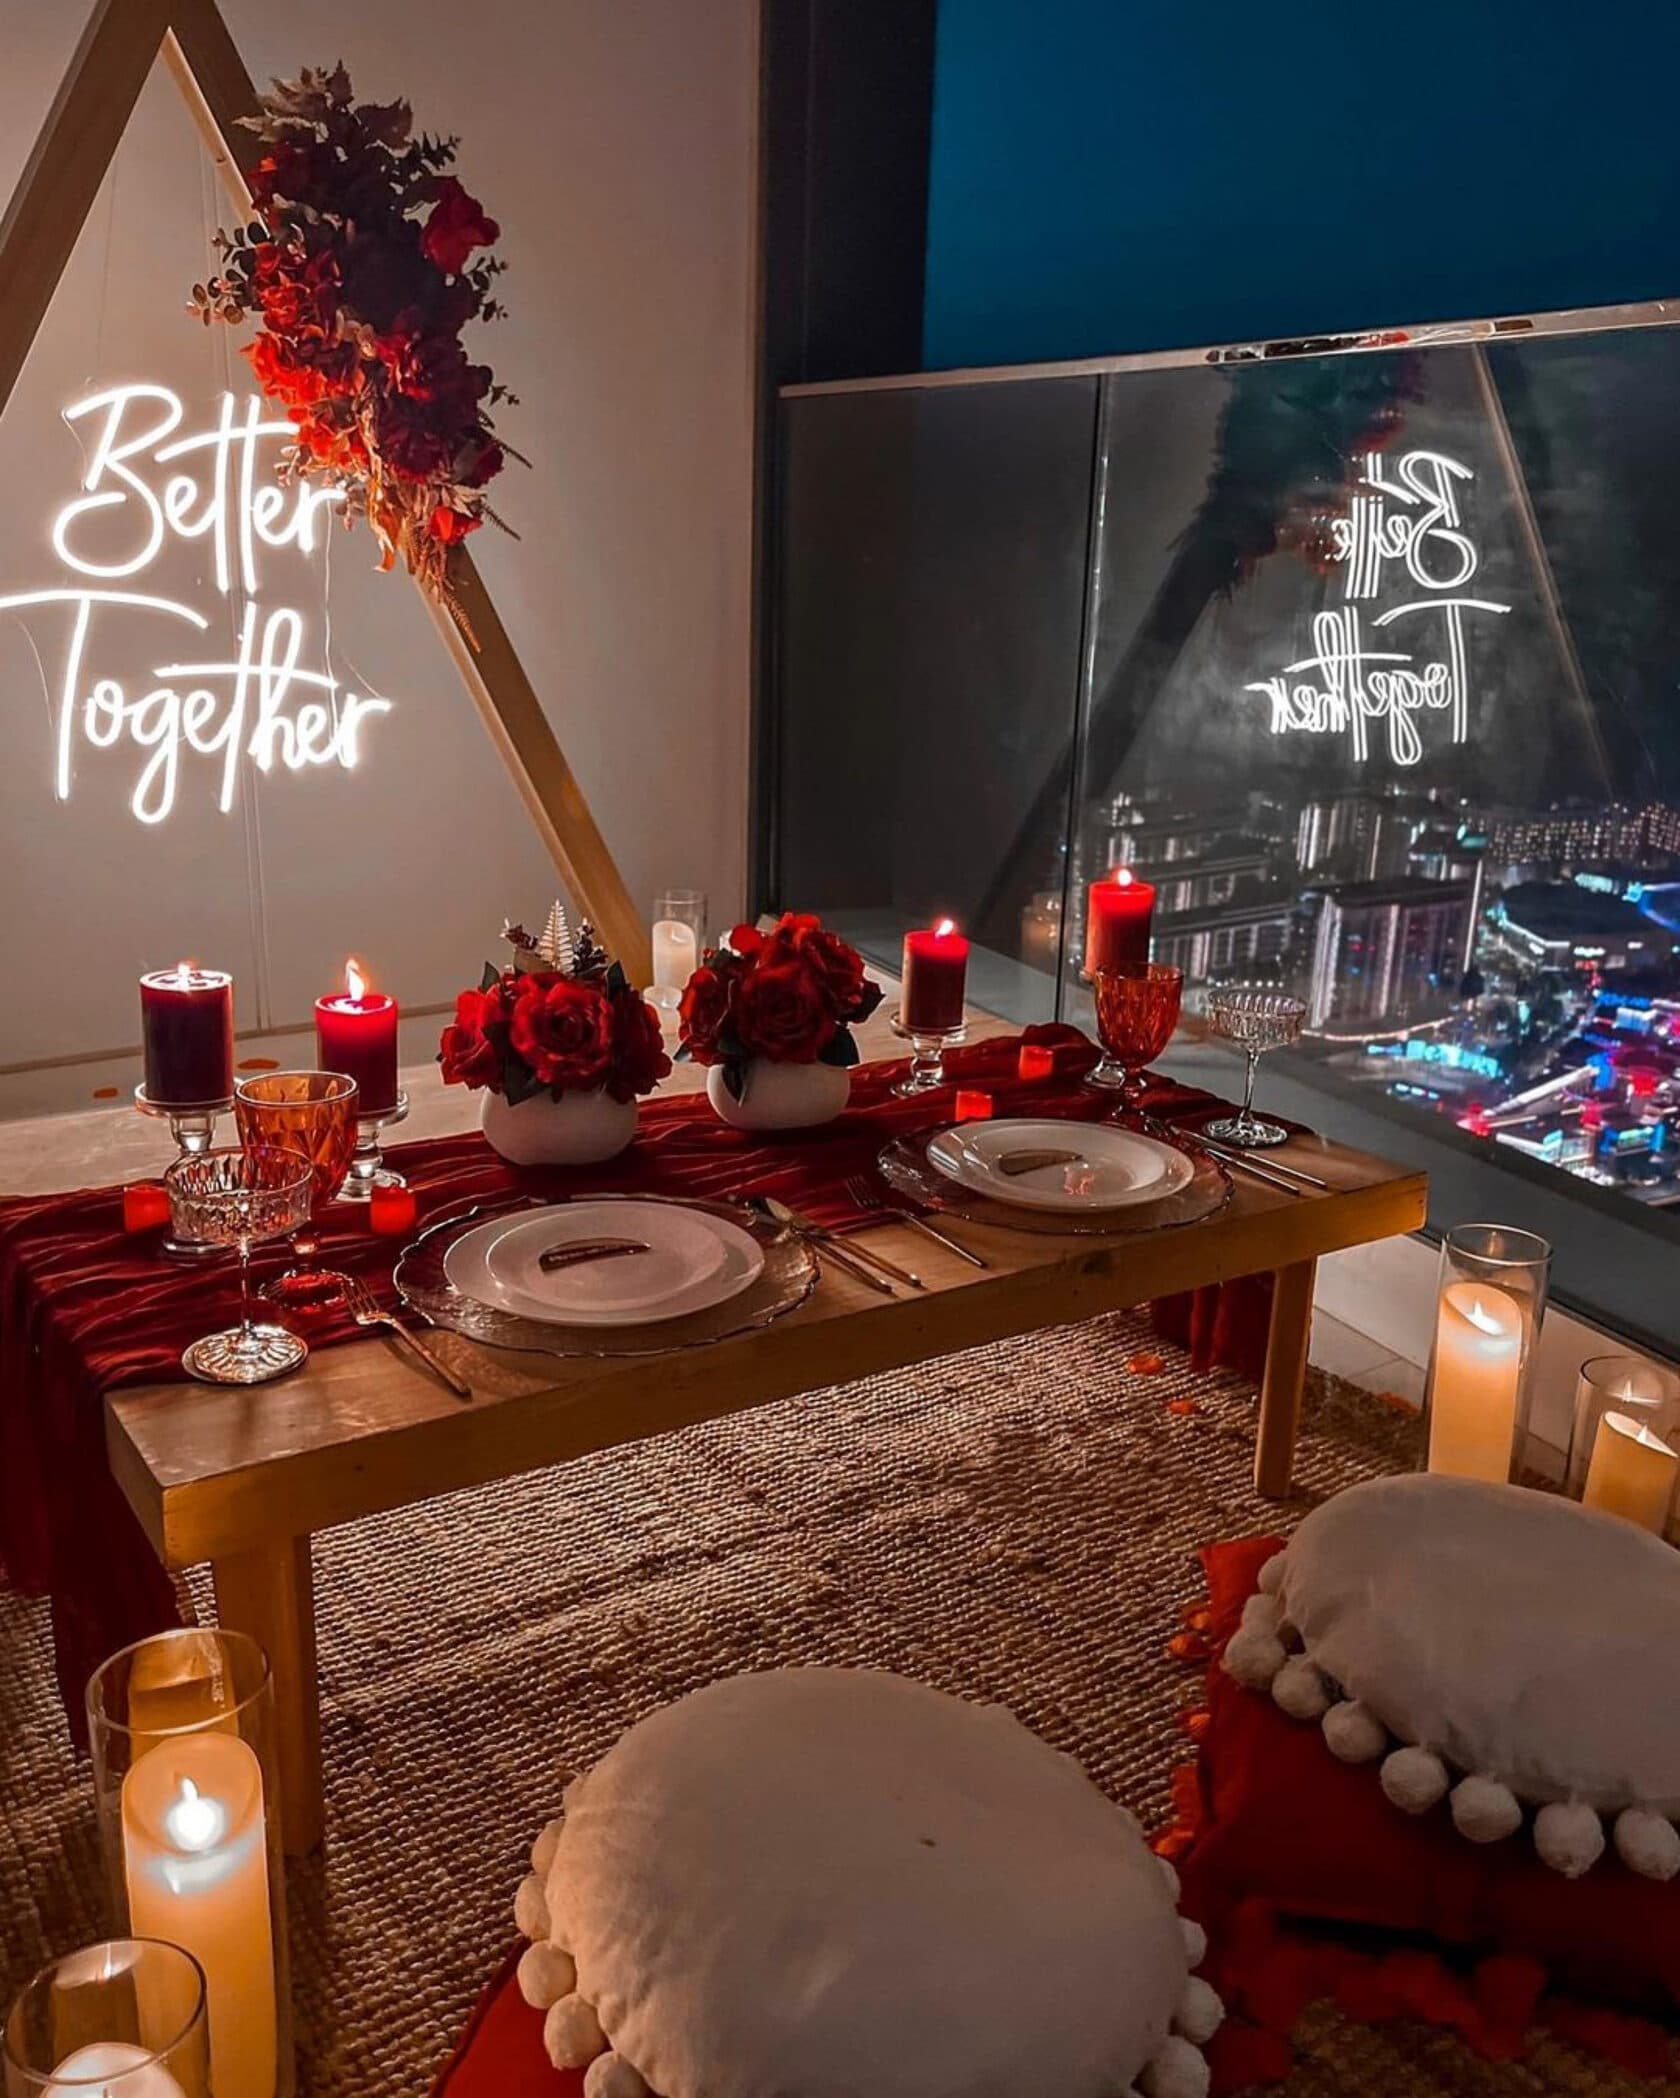 How to Set up a Table for the Perfect Date